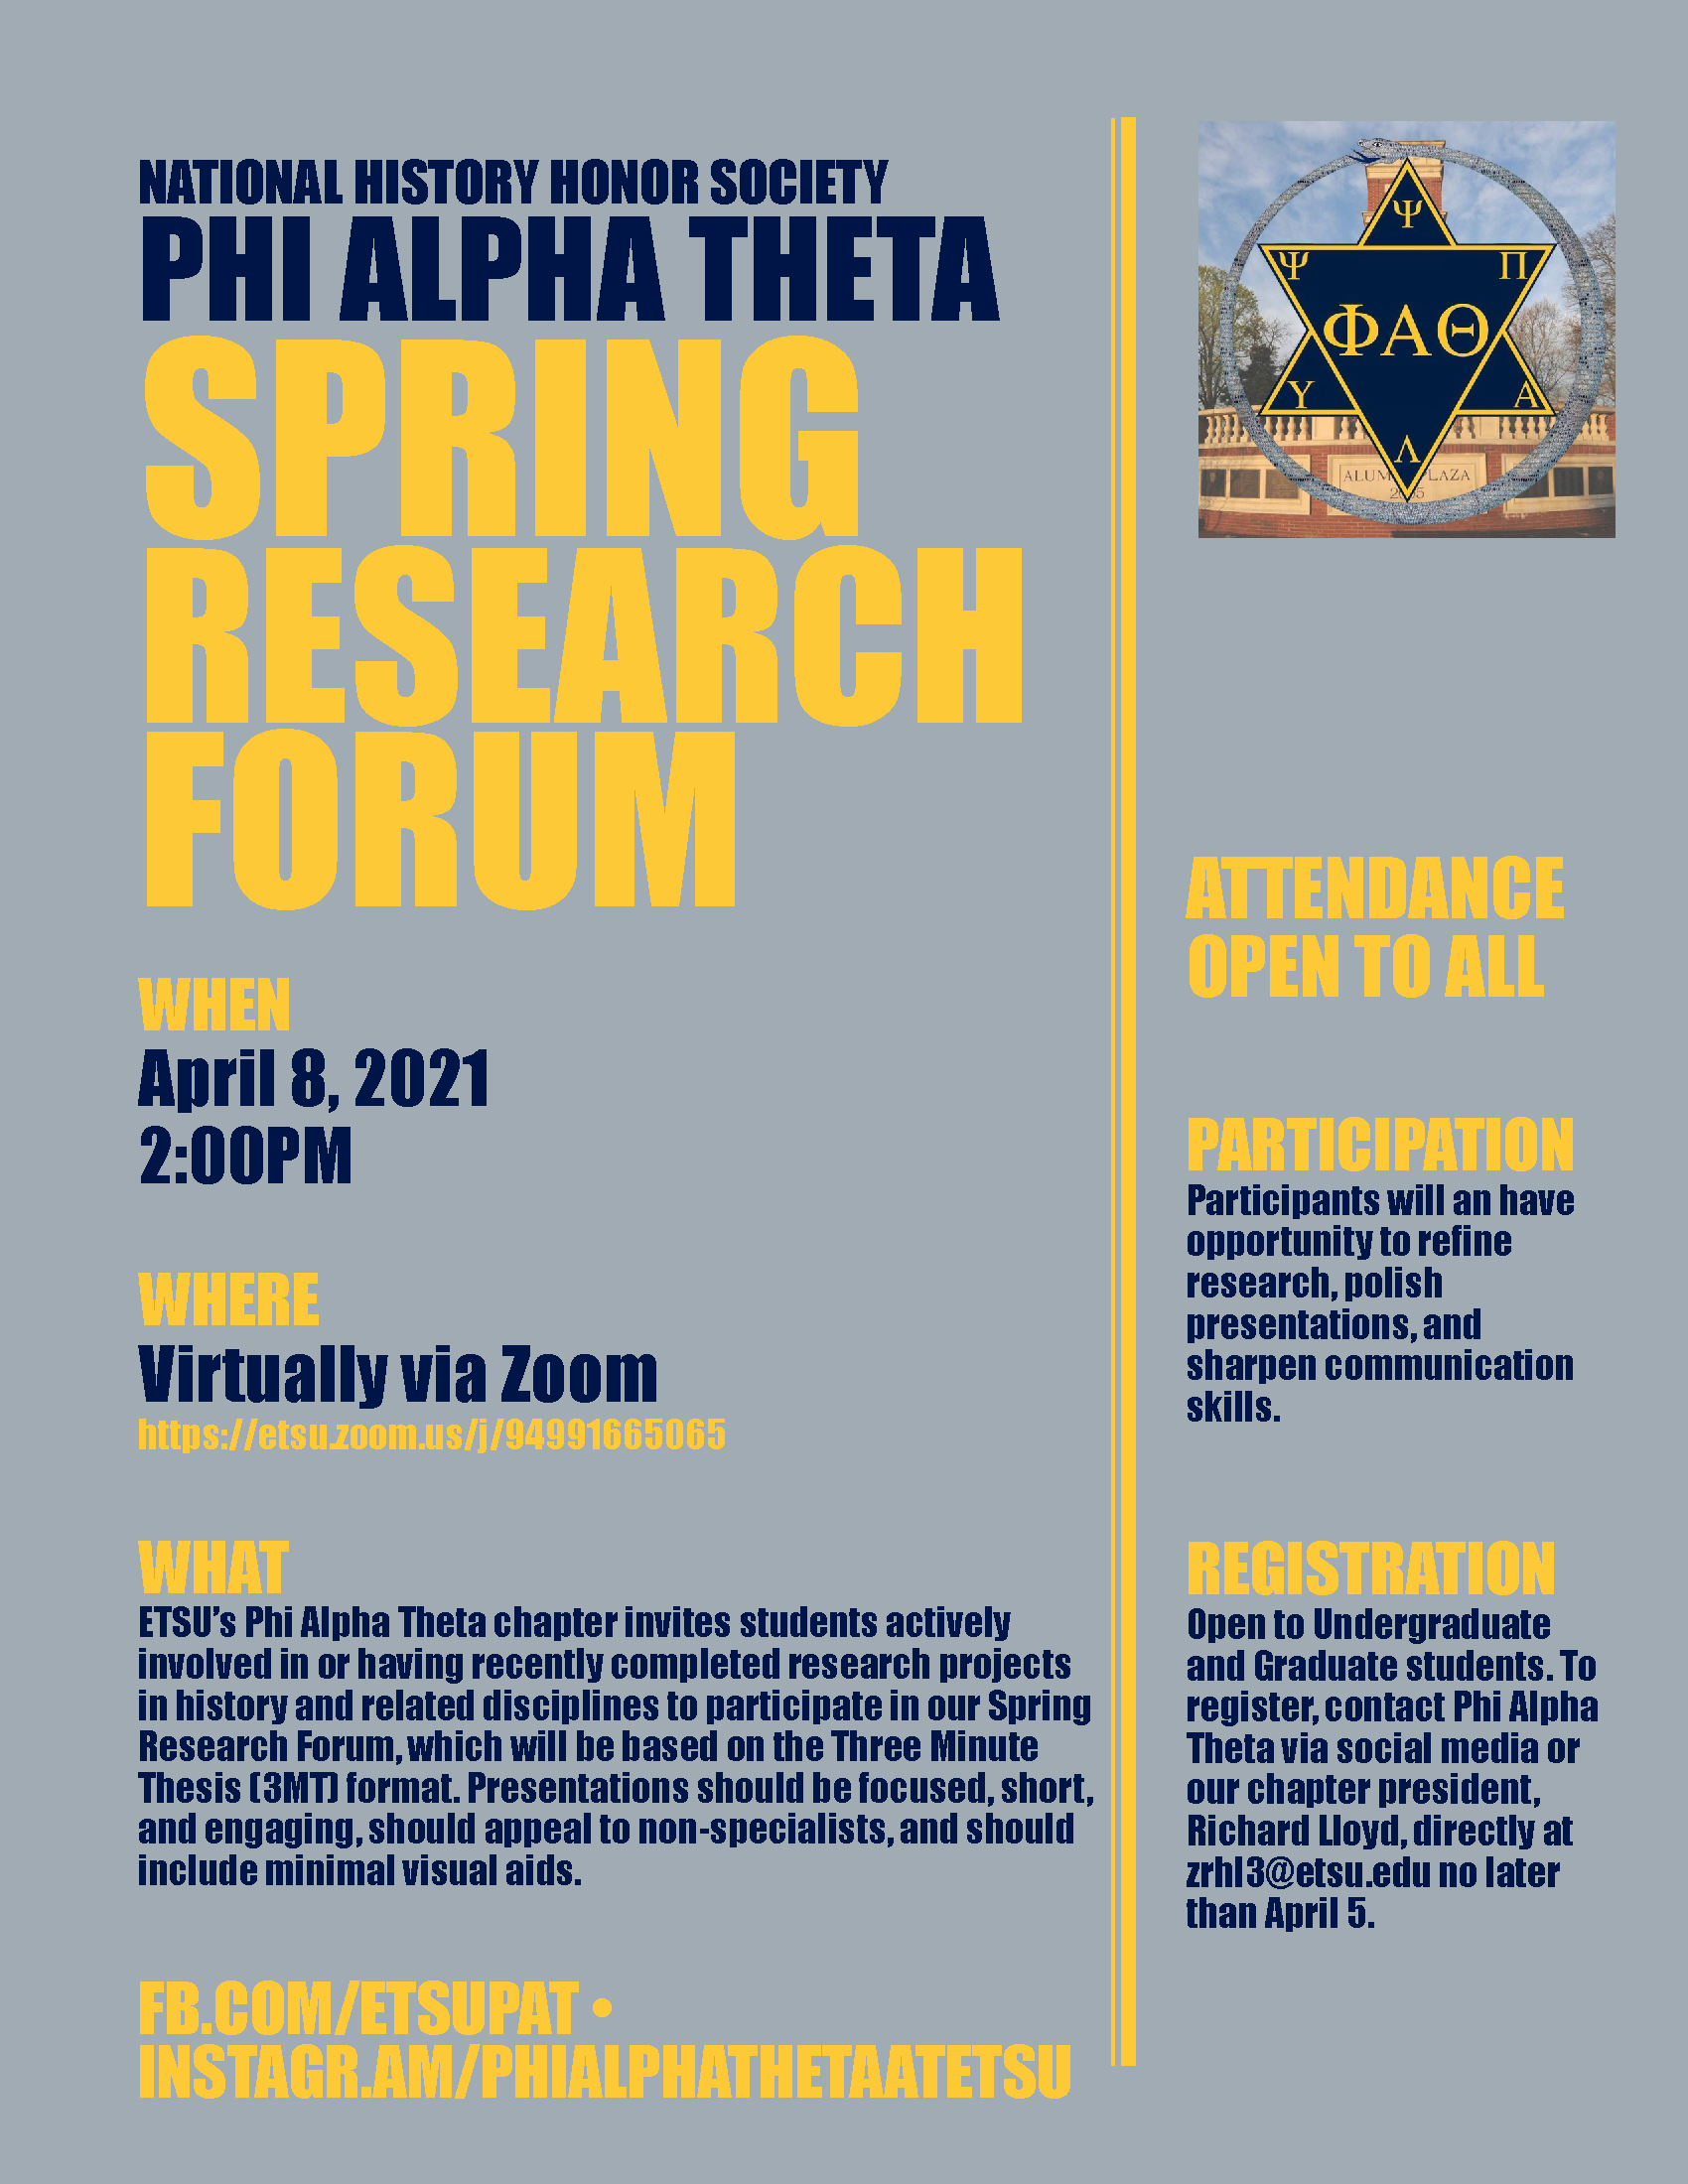 Phi Alpha Theta research forum information for spring 2021